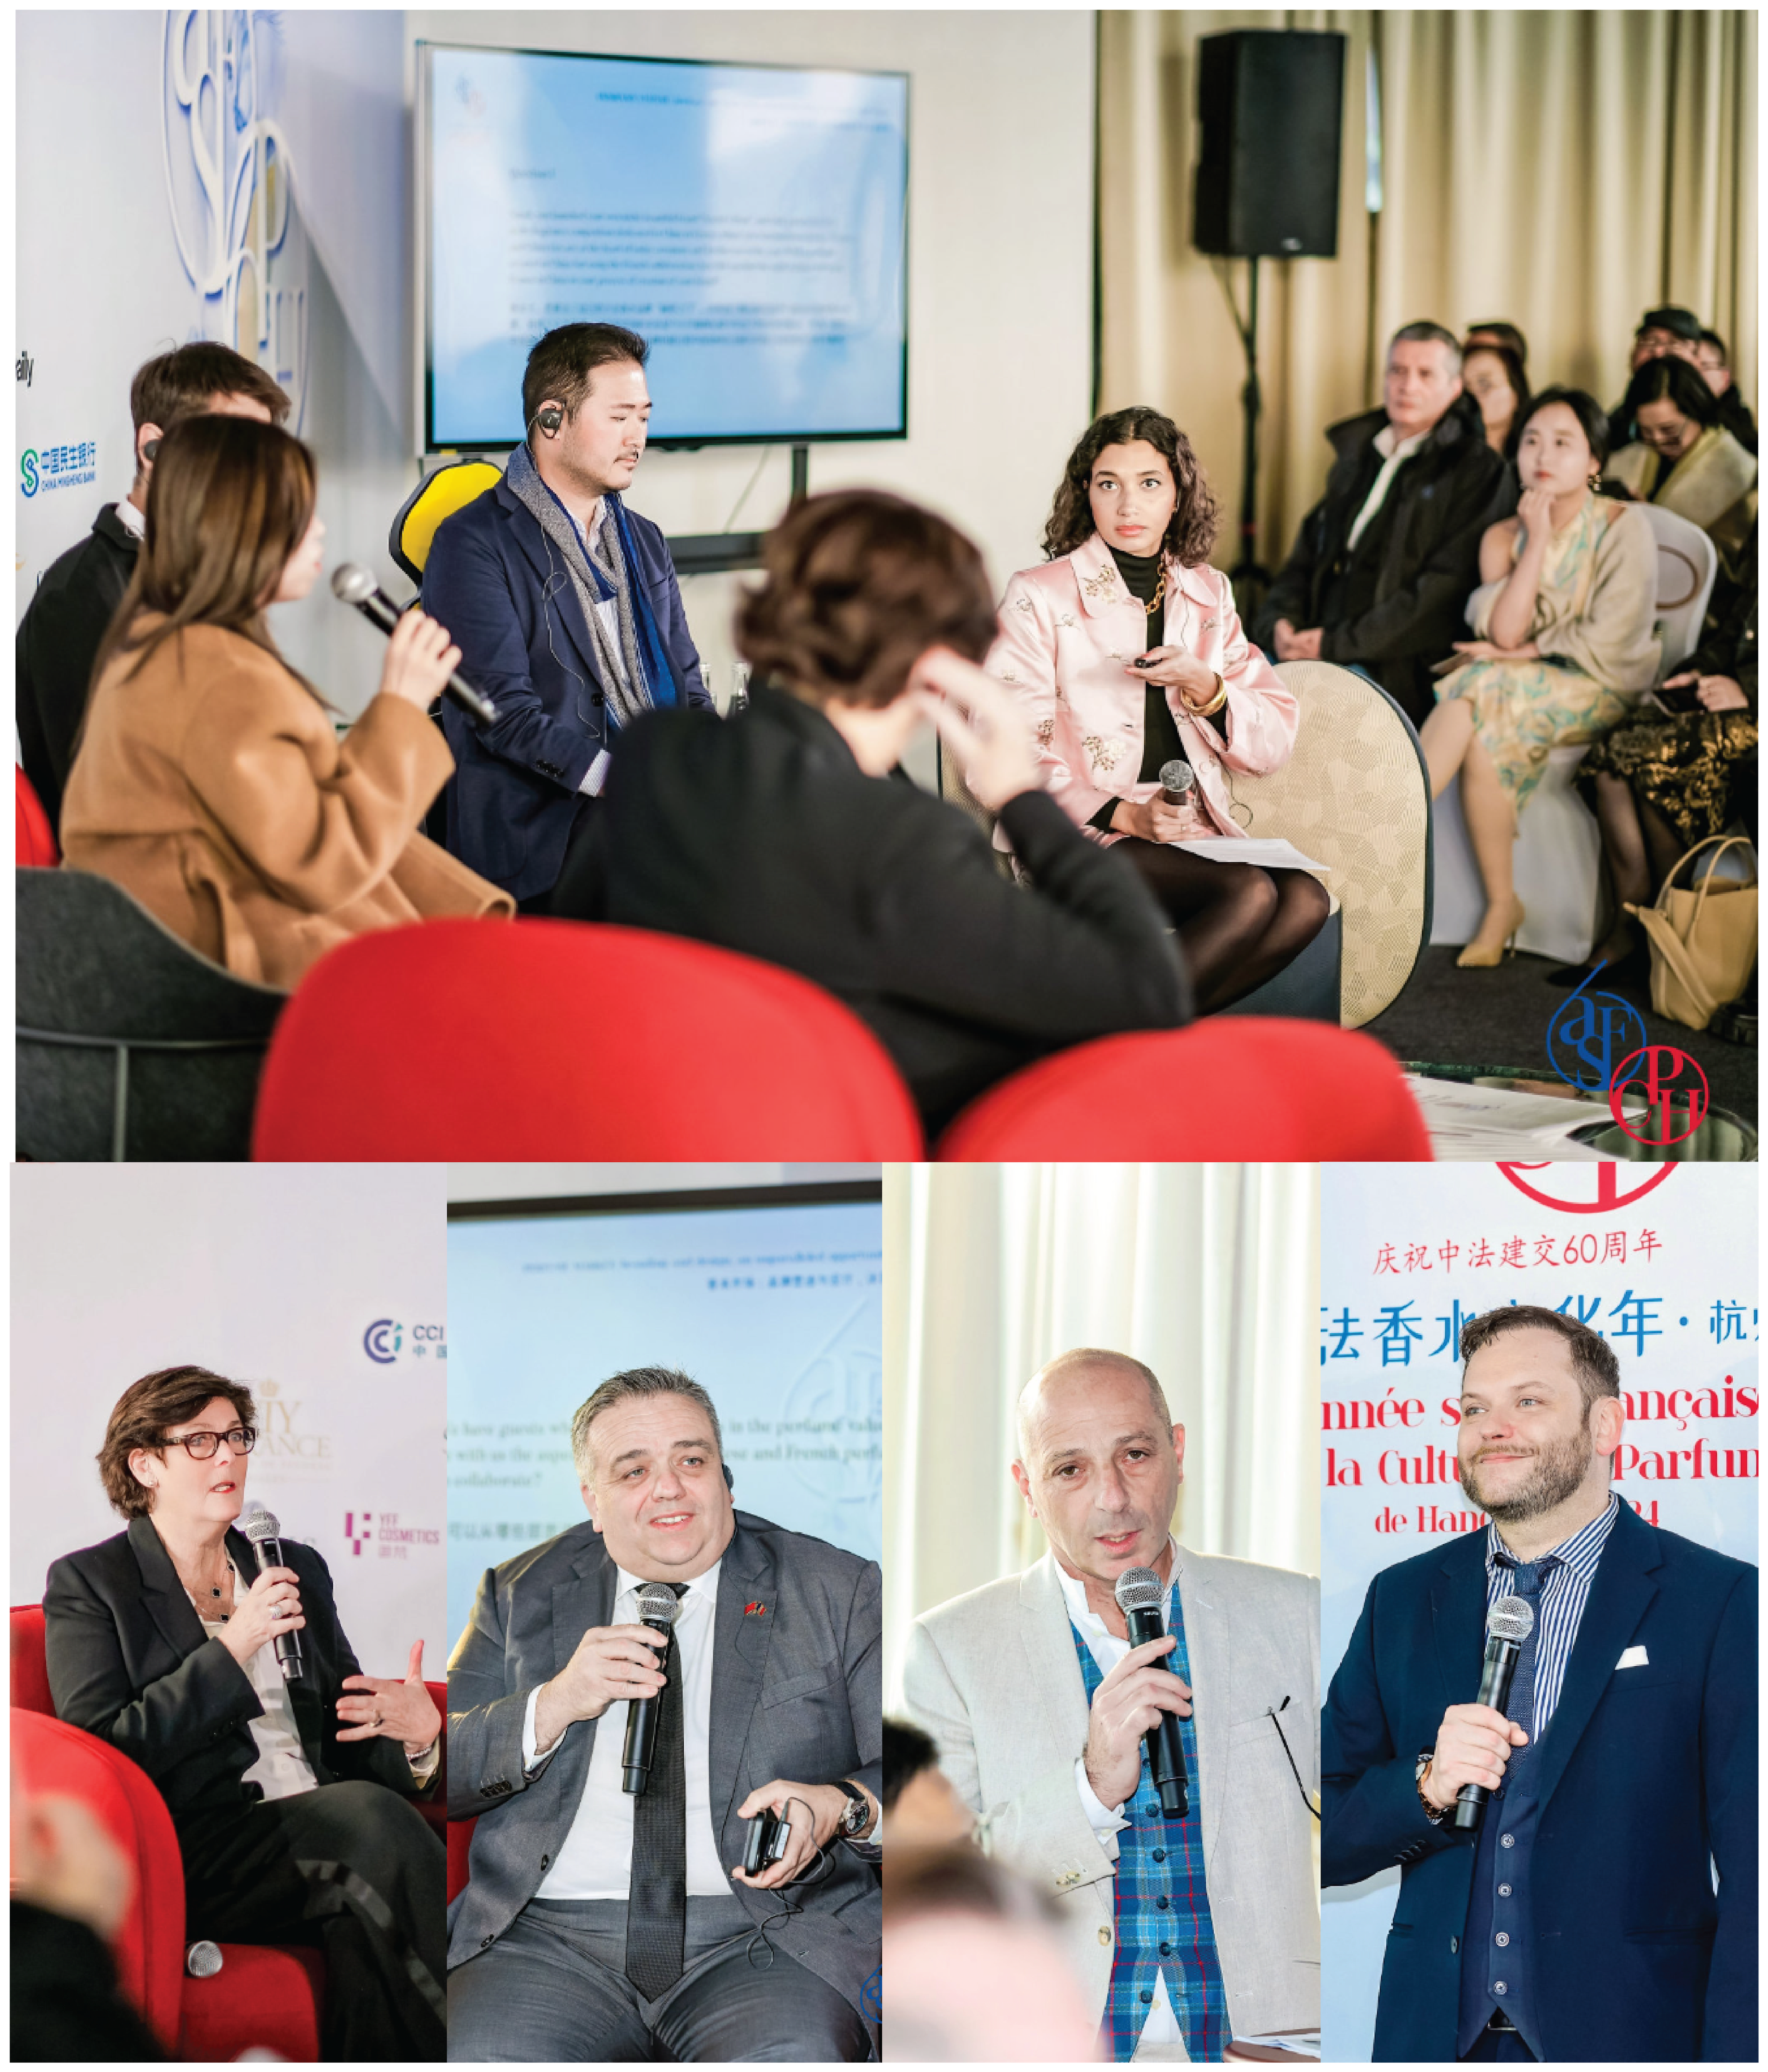 Panel discussions were held in celebration of the Sino-French Perfume Culture Year. Photo: Winland Group